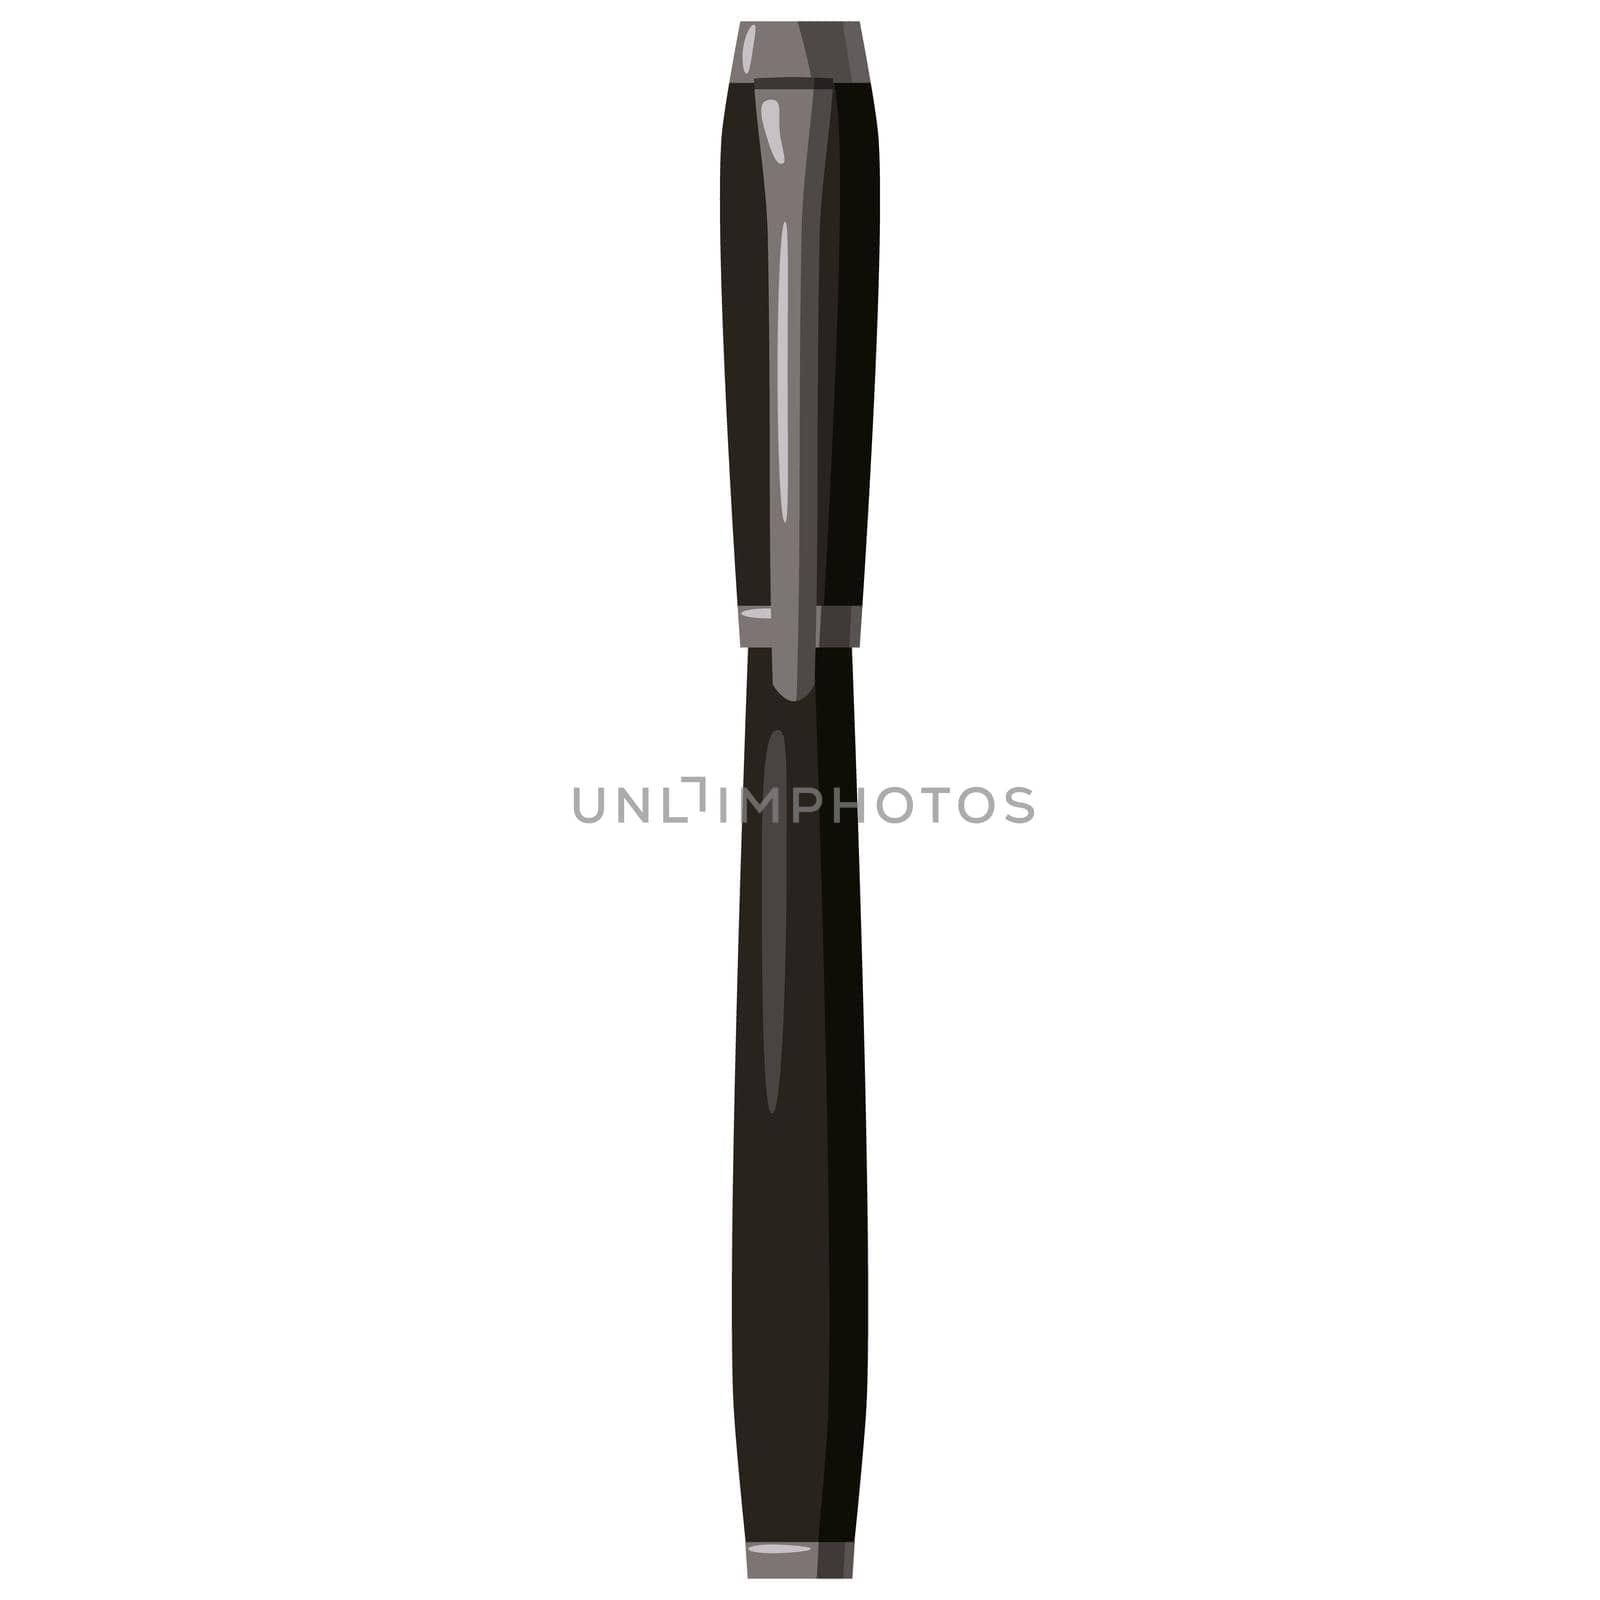 Black pen icon in cartoon style on a white background